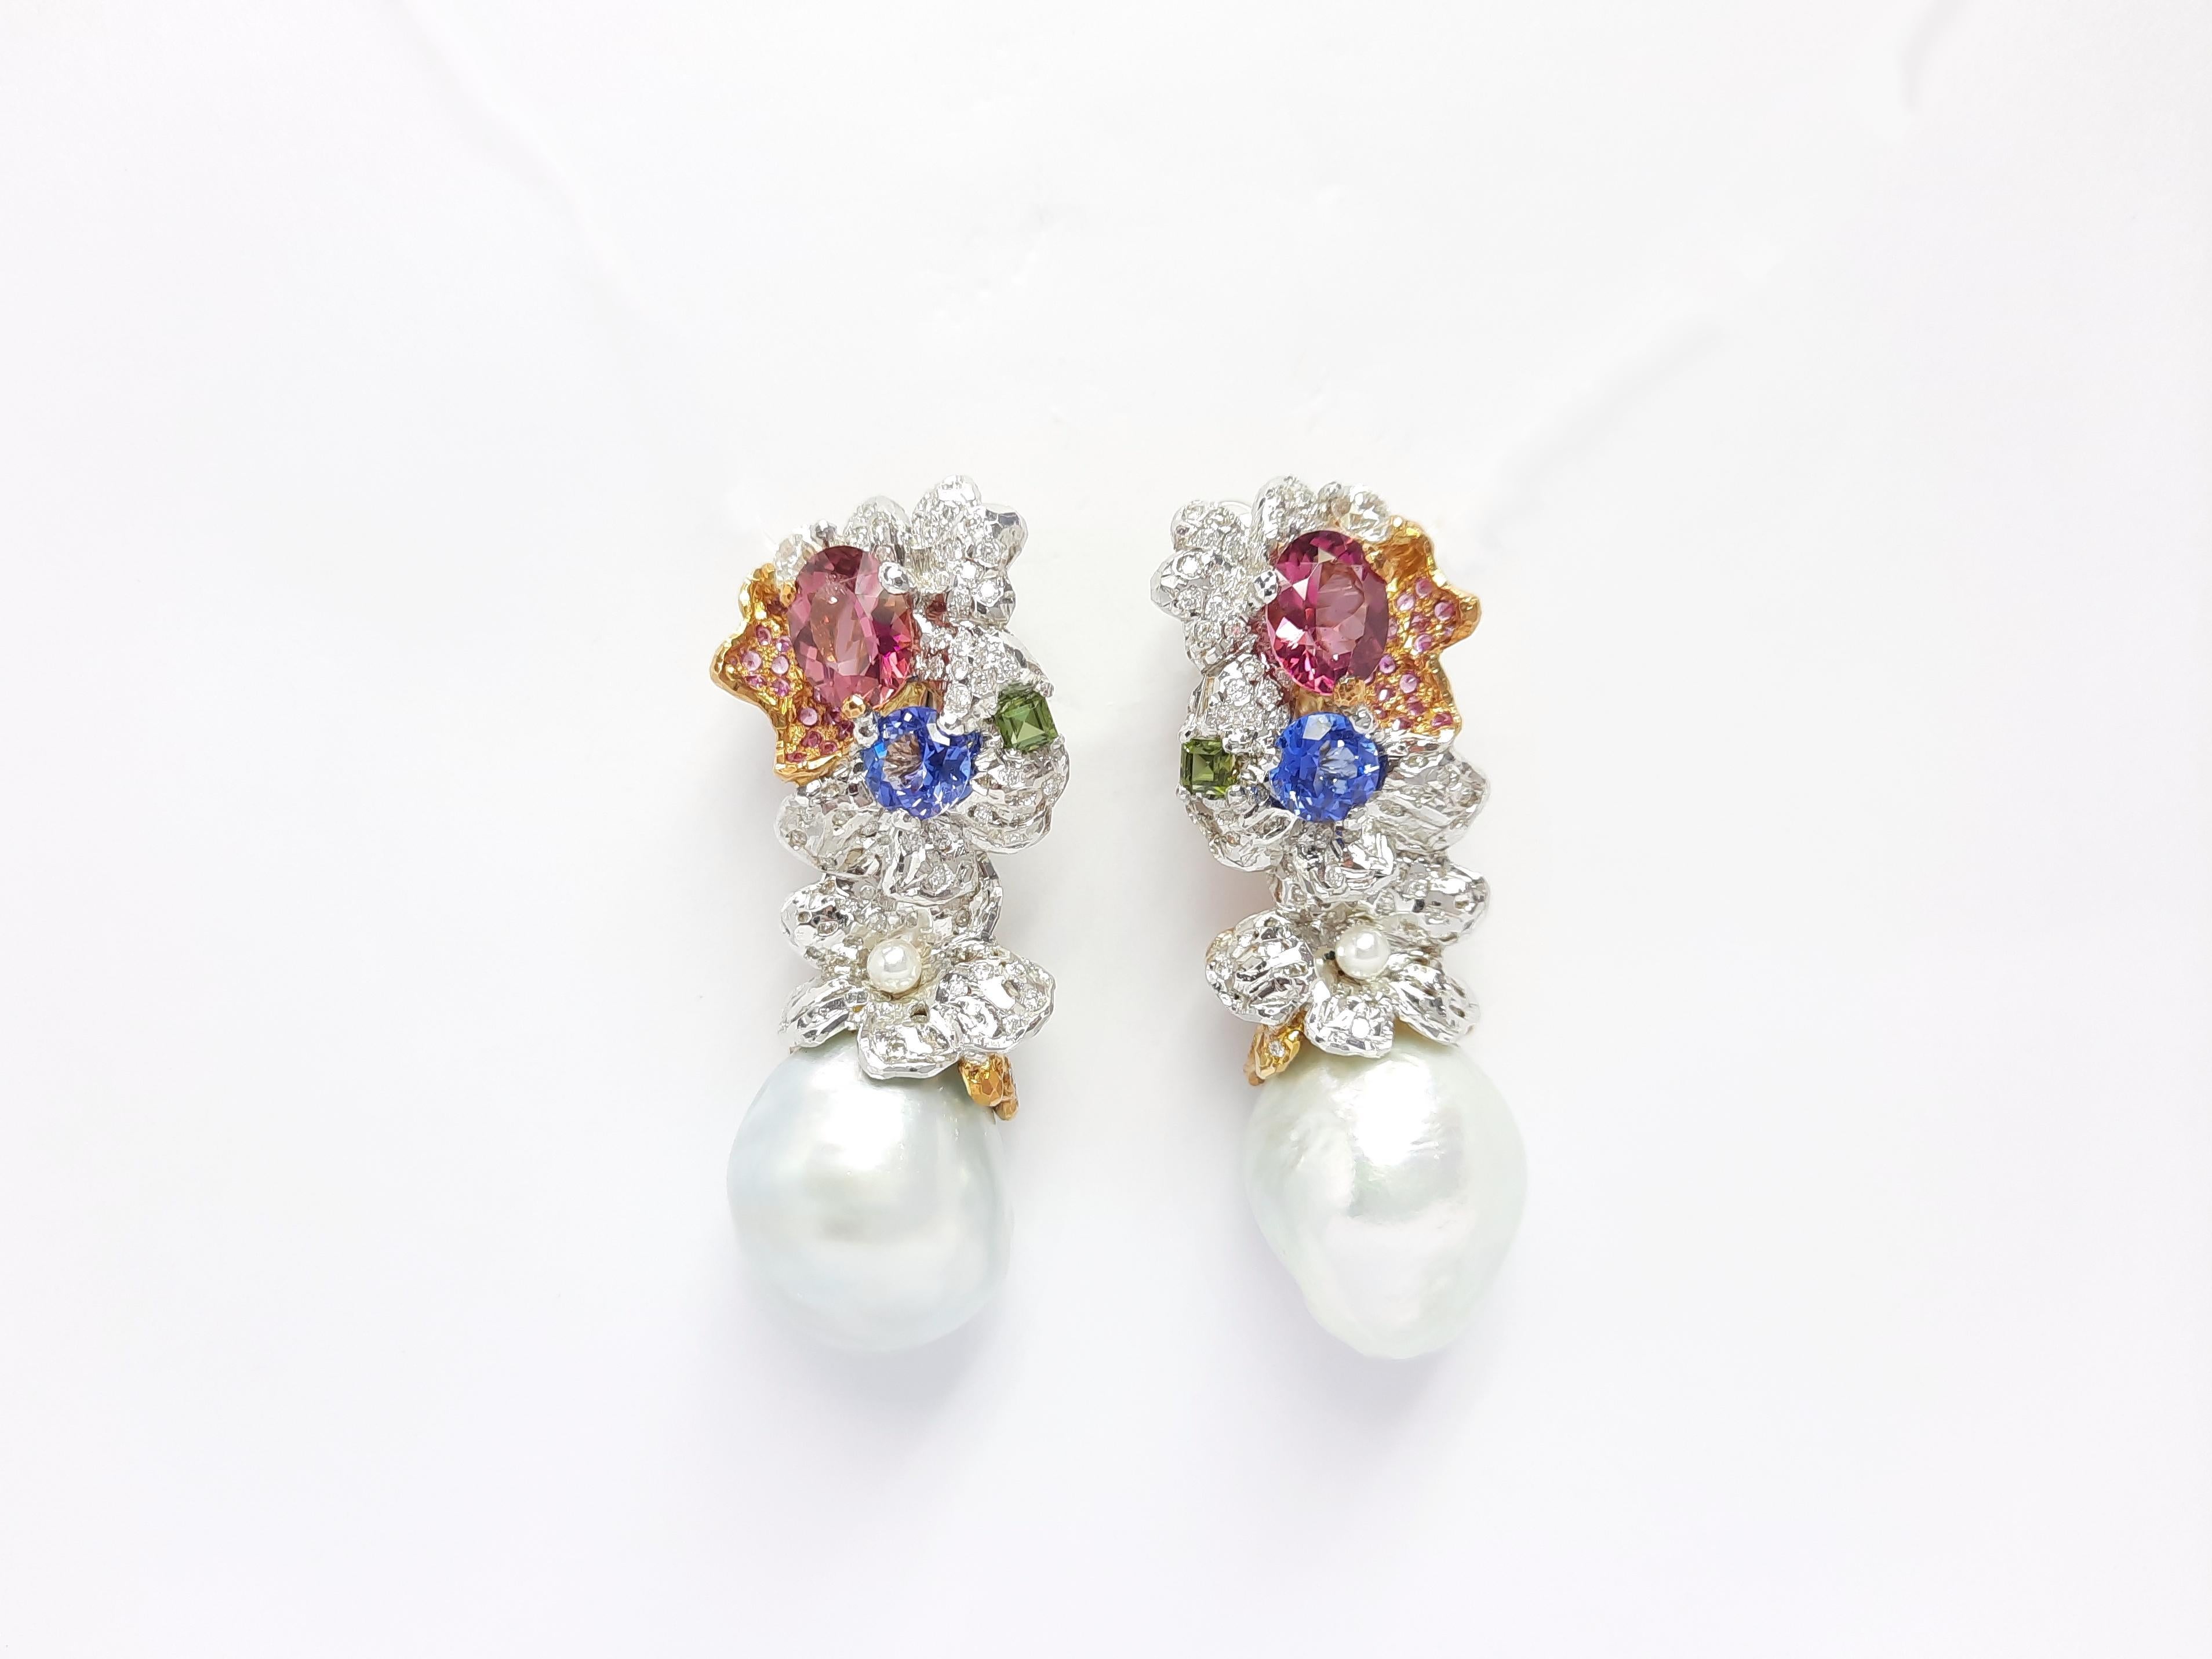 Inspired by Impressionism, MOISEIKIN® has created a blooming flower earrings  in tridimensional manner. Trembling flowers and sweet fragrance of coming ripe fruits are embodied  in gems and metals. 
Gold filigree is detailed as branch which you feel